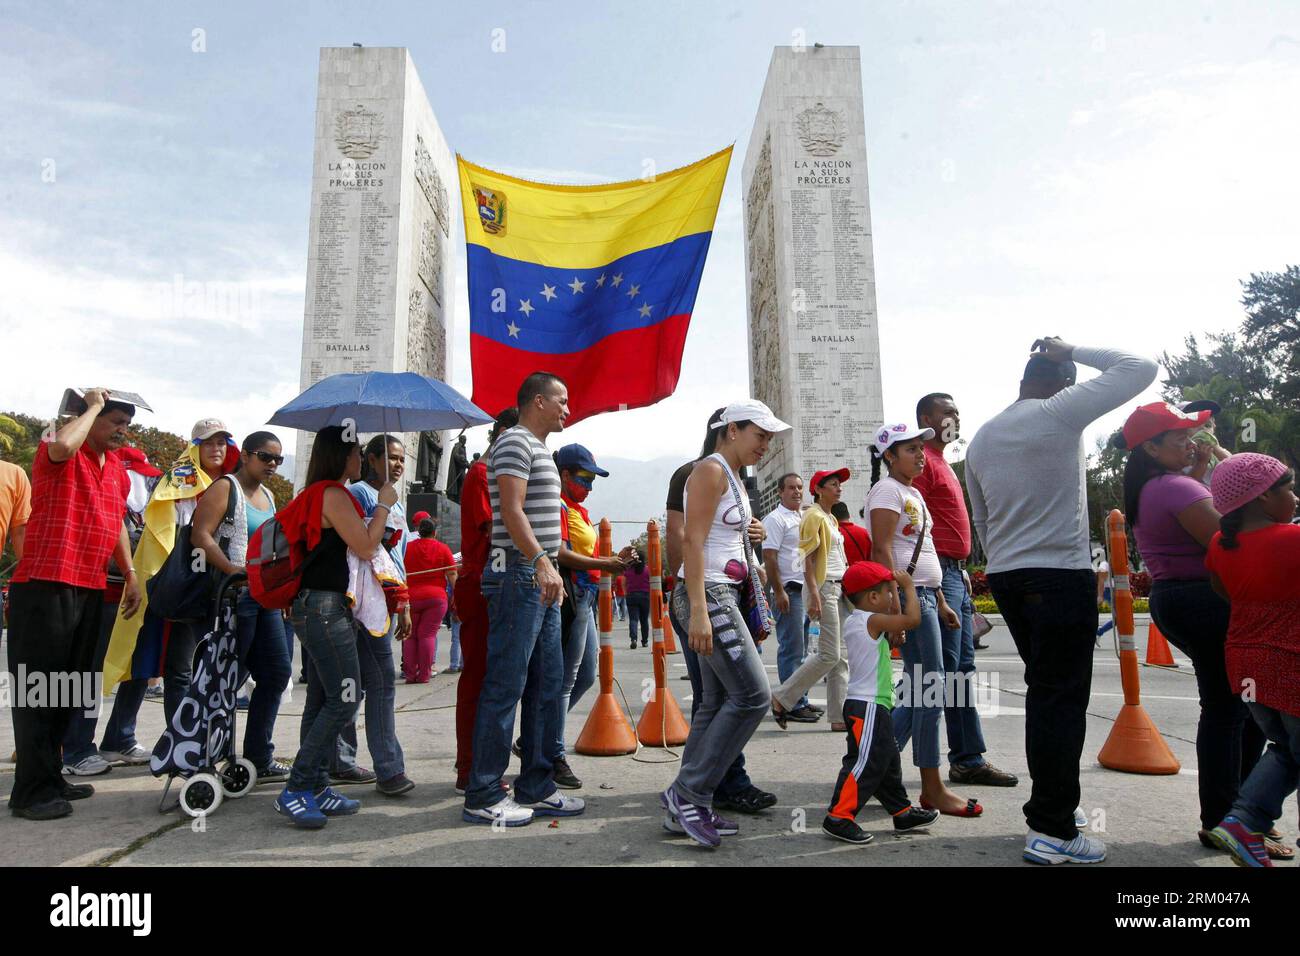 Bildnummer: 59317731  Datum: 08.03.2013  Copyright: imago/Xinhua (130307) -- CARACAS, March 7, 2013 (Xinhua) -- Residents make a line to pay respects to the coffin with the remains of Venezuelan President Hugo Chavez at the Military Academy in Fort Tiuna in Caracas, capital of Venezuela, on March 7, 2013. Venezuela s President Hugo Chavez died on March 5, 2013 after struggling with cancer for almost two years. Latin American presidents and officials will travel to Venezuela to participate in a ceremony to honor Chavez, scheduled for Friday morning in Caracas. (Xinhua/AVN) (itm) (ce) VENEZUELA- Stock Photo